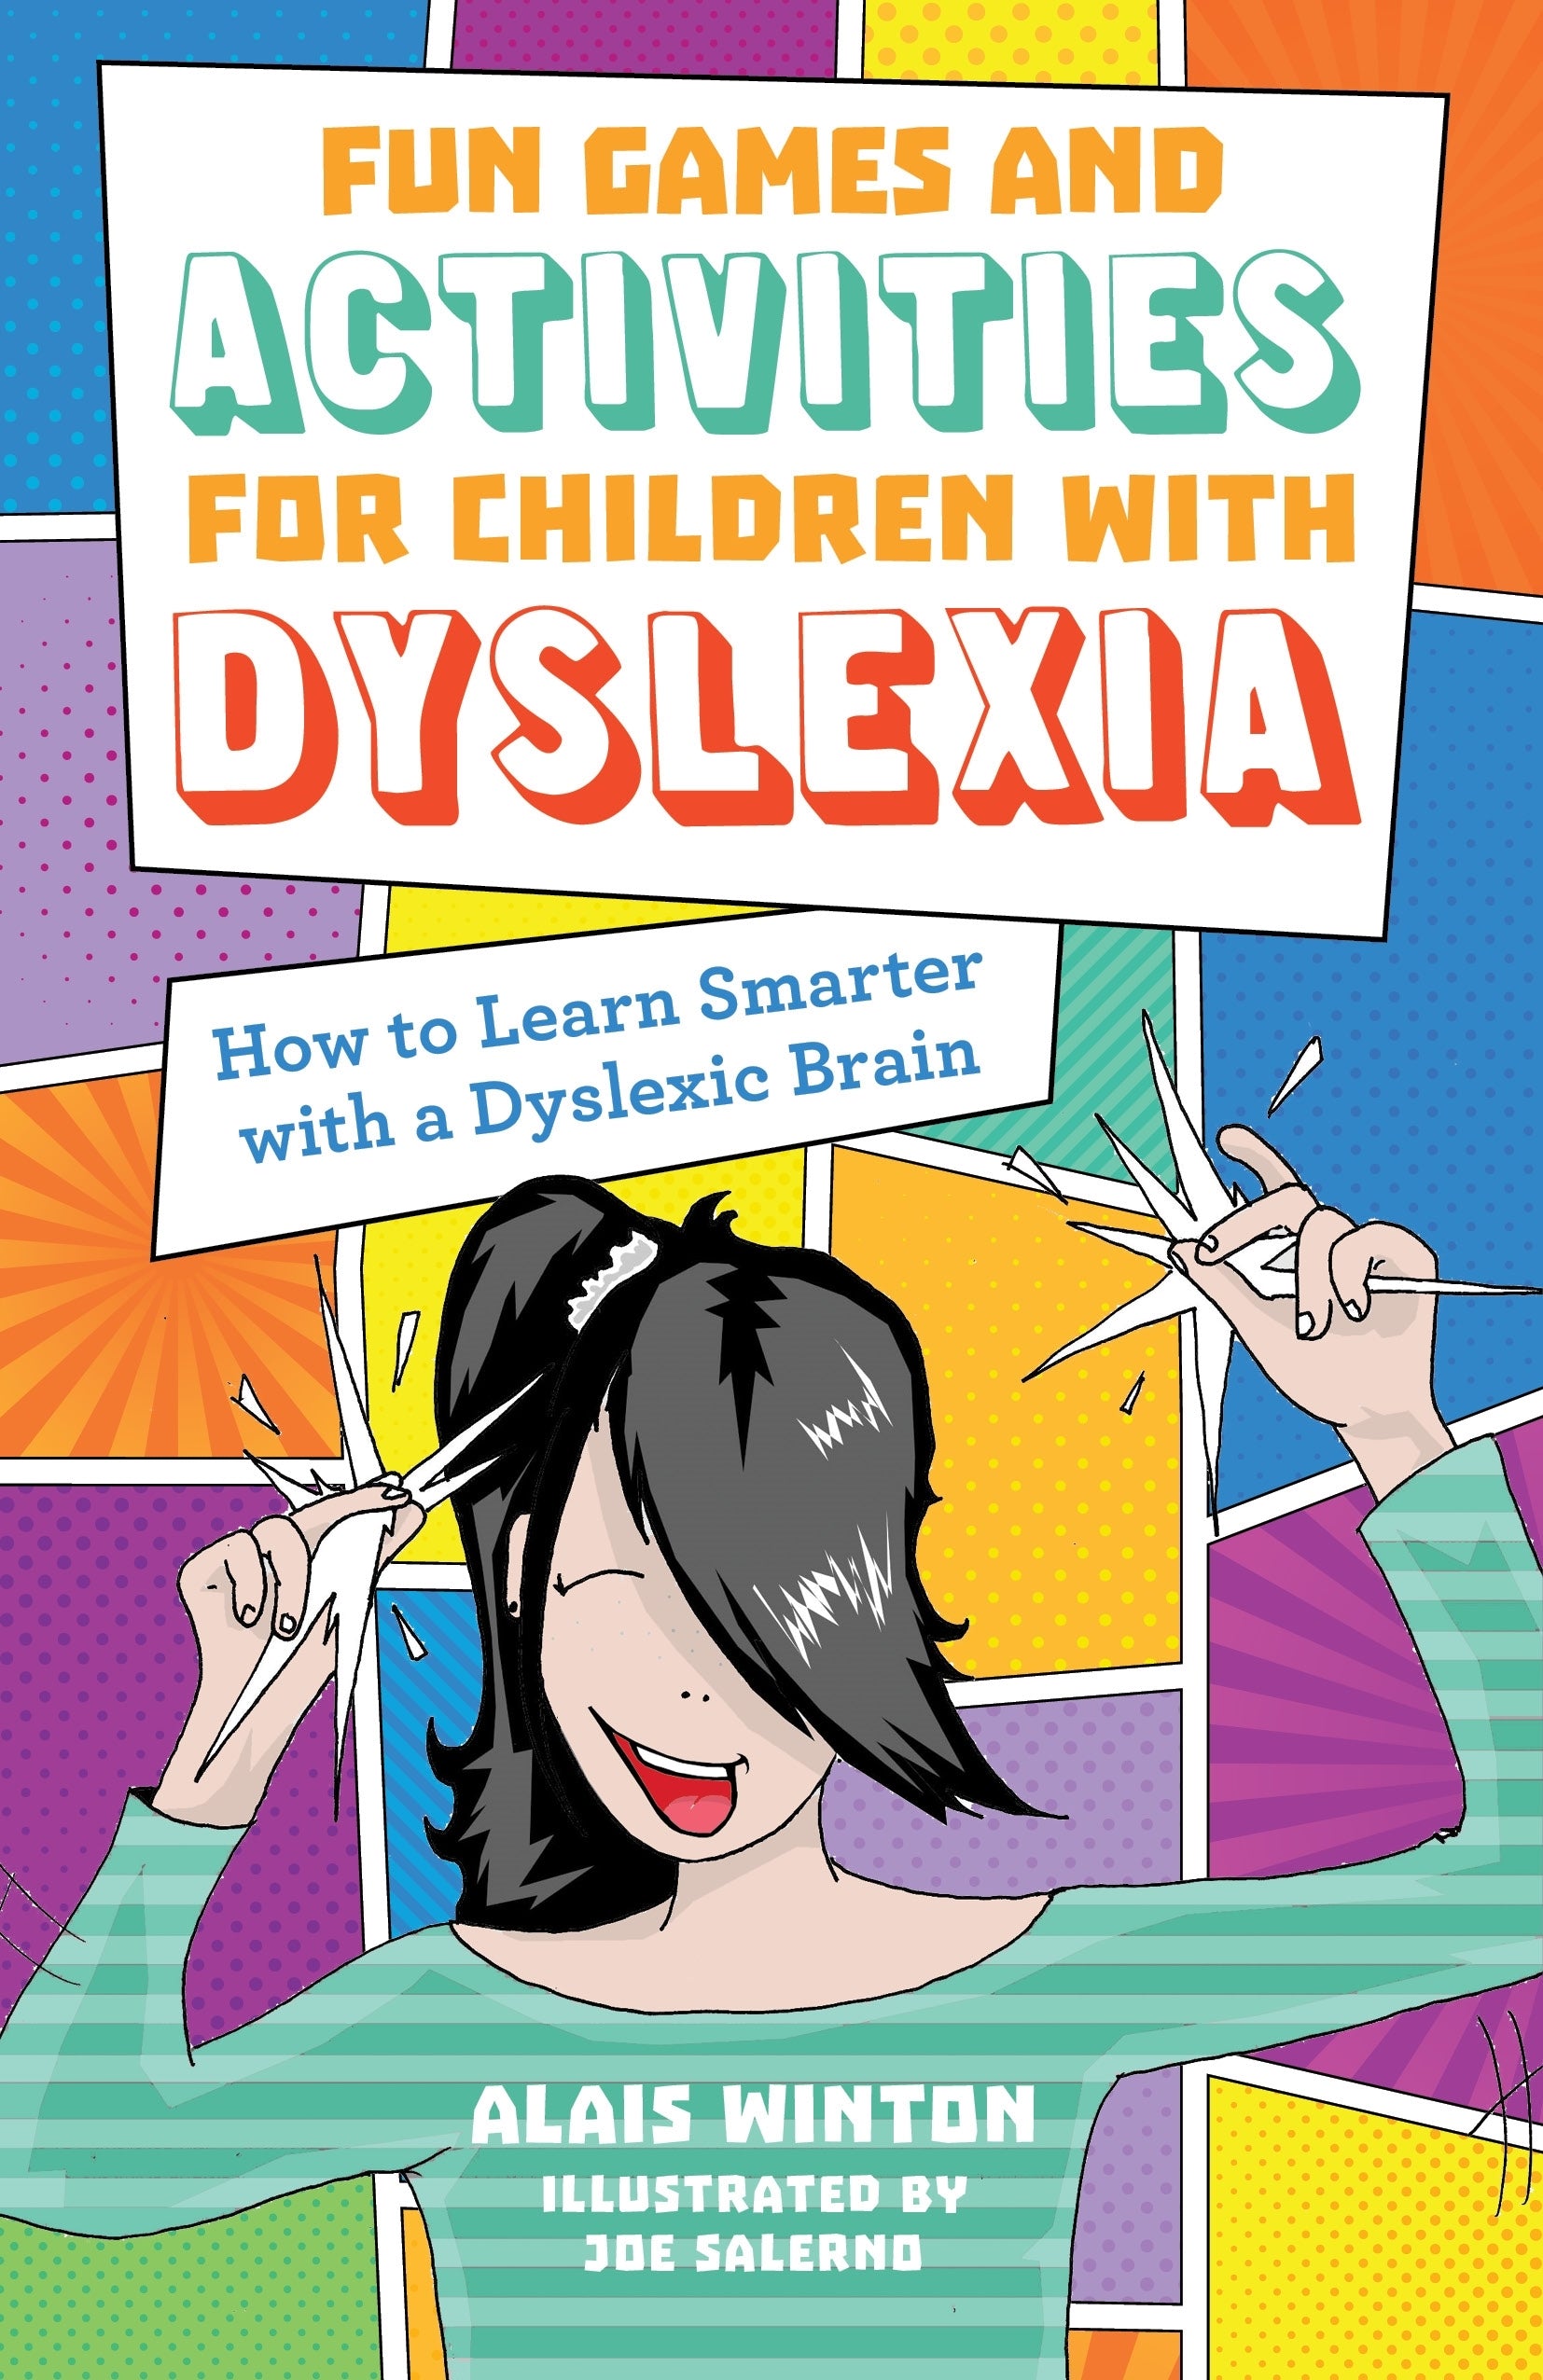 Fun Games and Activities for Children with Dyslexia by Alais Winton, Joe Salerno